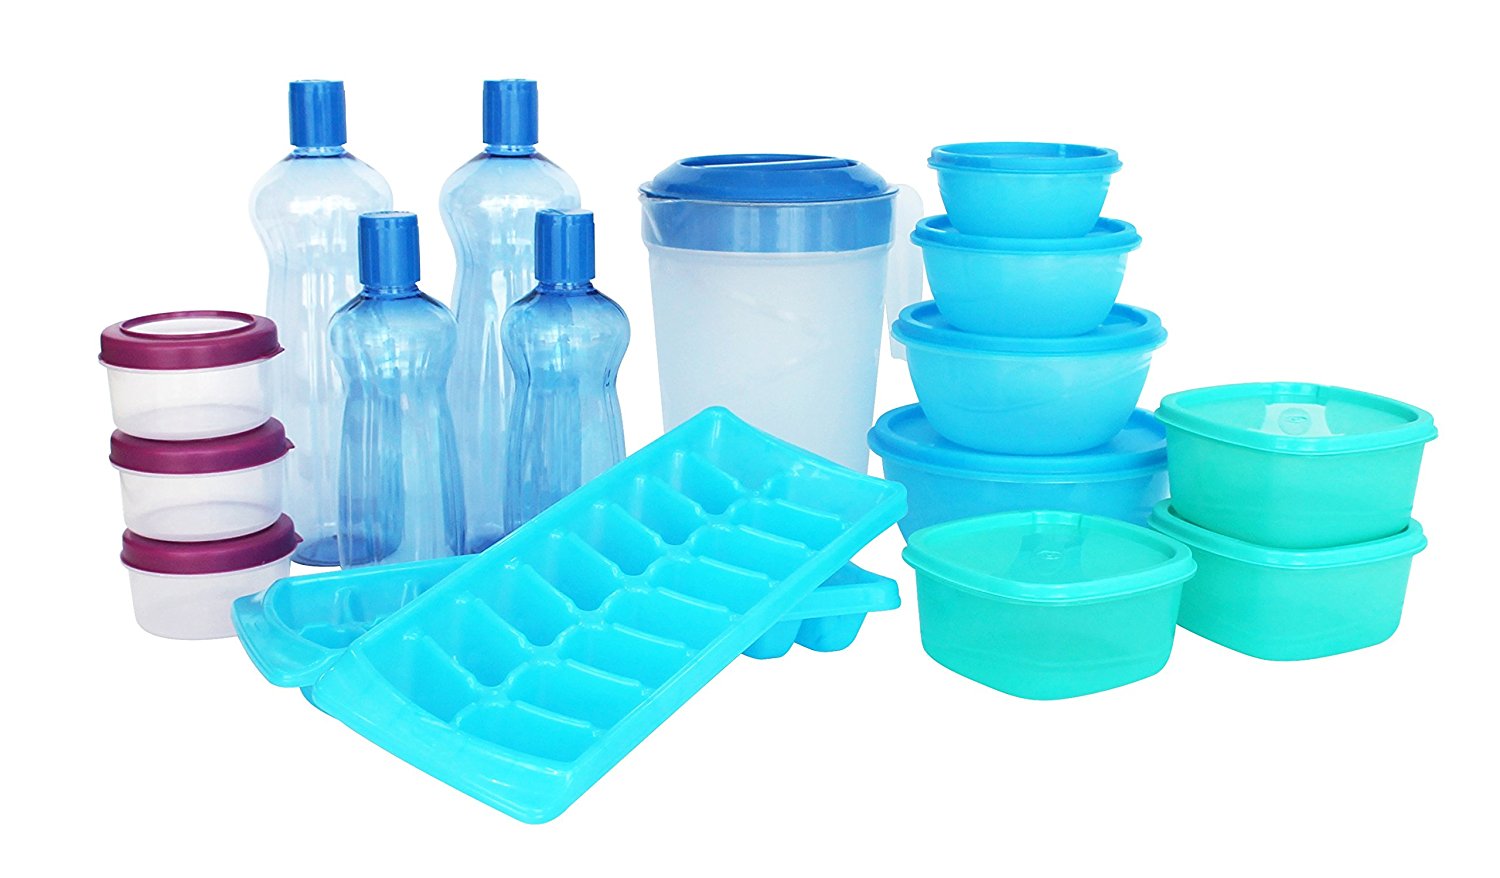 Buy Princeware Plastic Refrigerator Jar Set, 17-Pieces, Multicolour at Rs 379 only